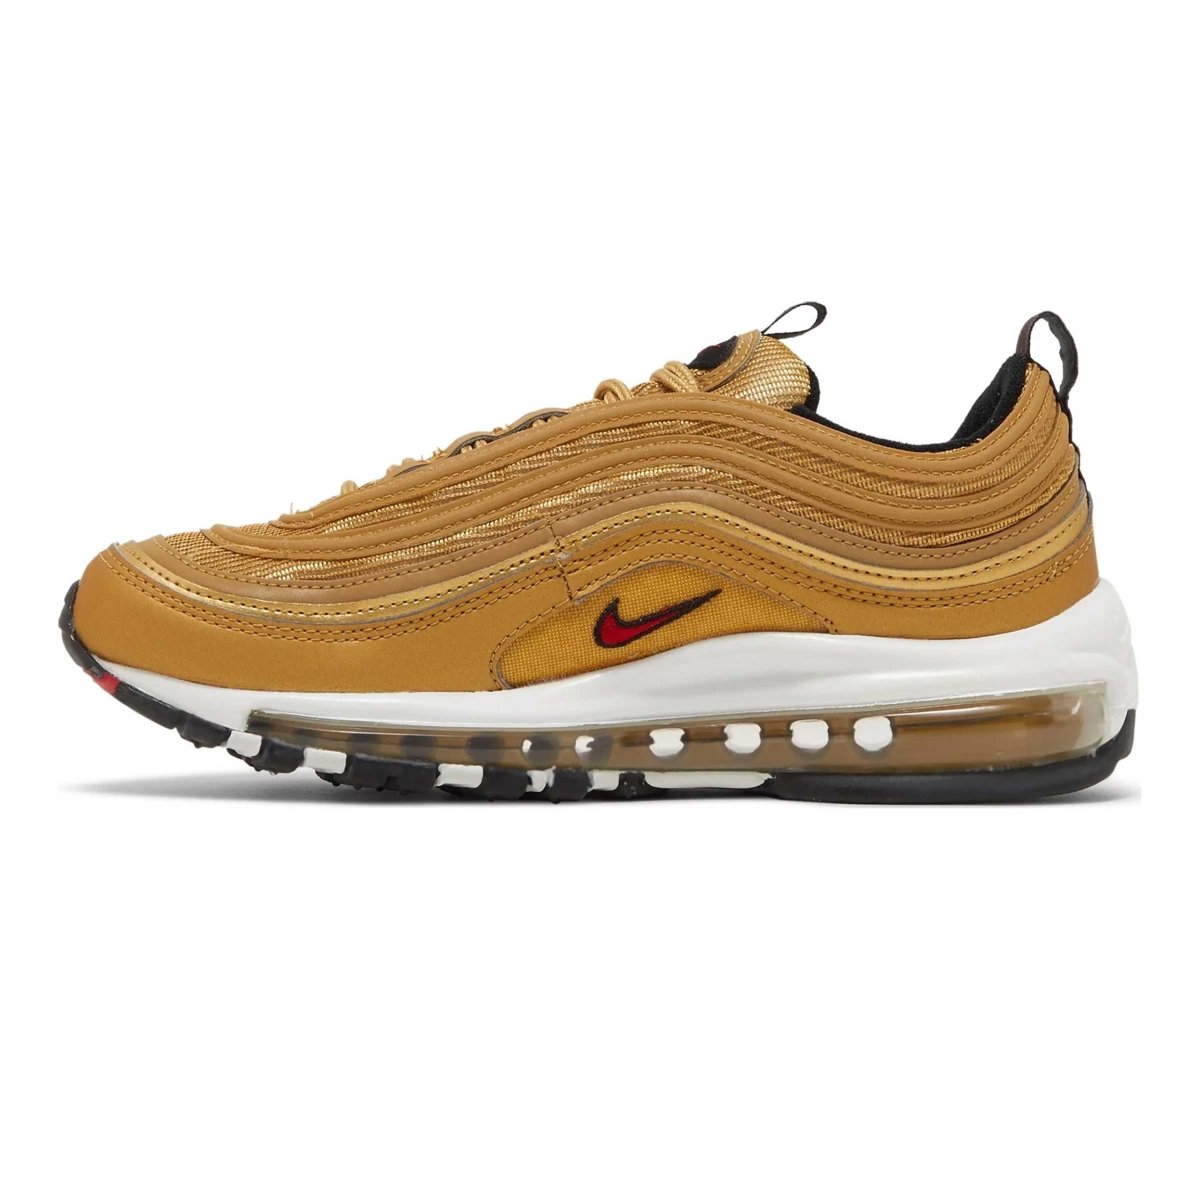 Nike Women's Air Max 97 OG 'Gold Bullet' - 10026450 - West NYC